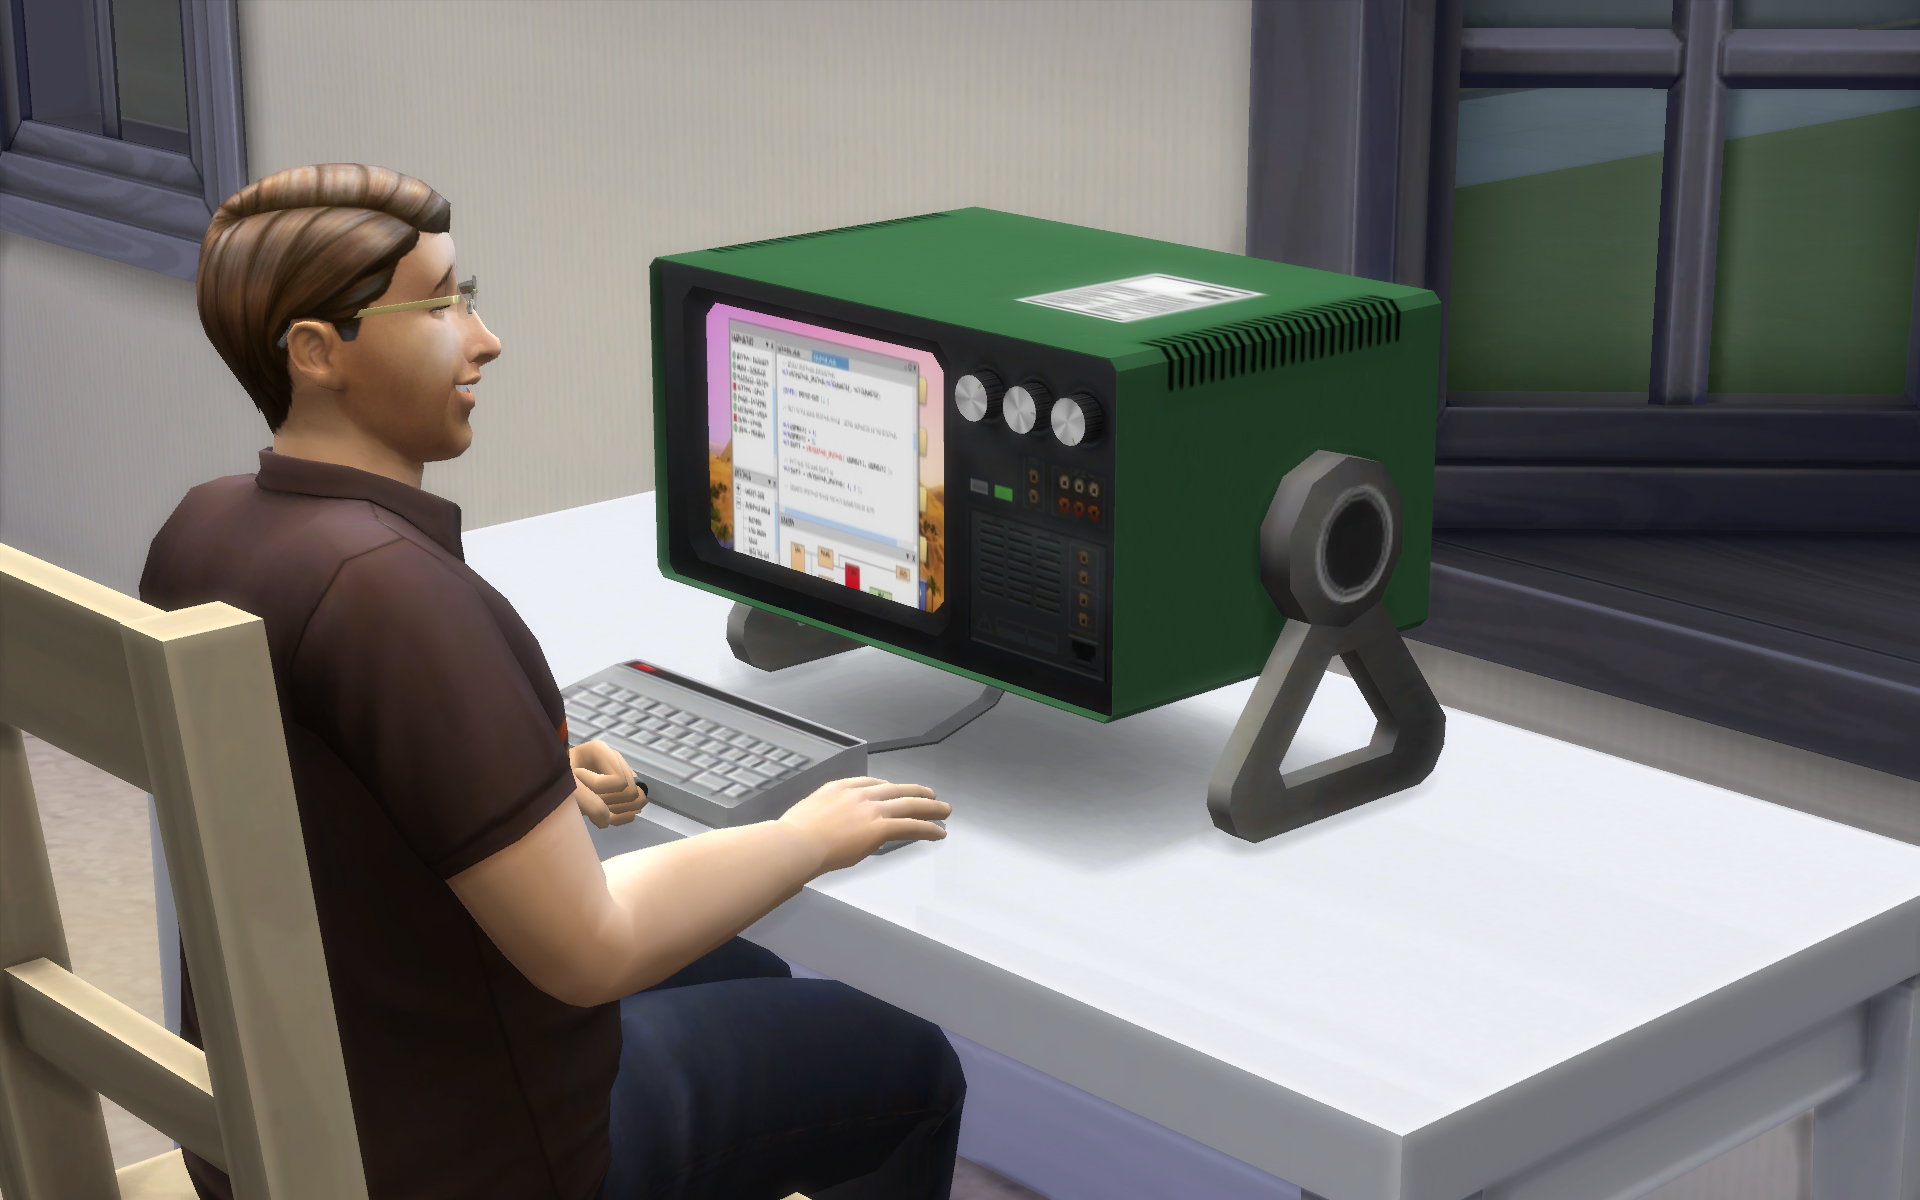 The Sims 4: How to Keep Playing on Older Computers